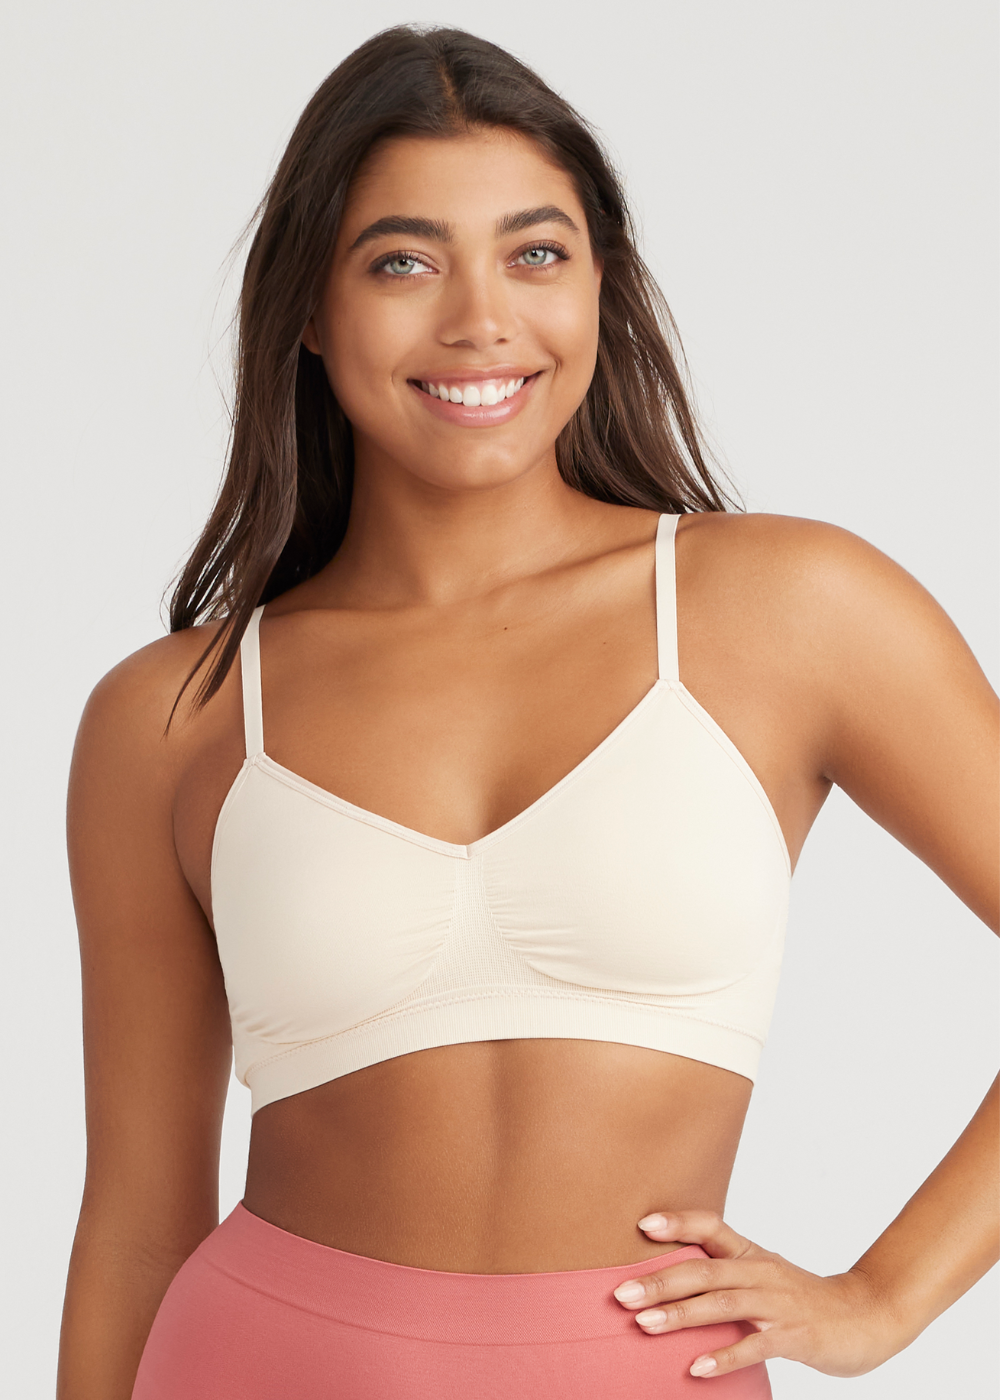 V-Neck Bralette - Seamless from Yummie in Nude  - 1